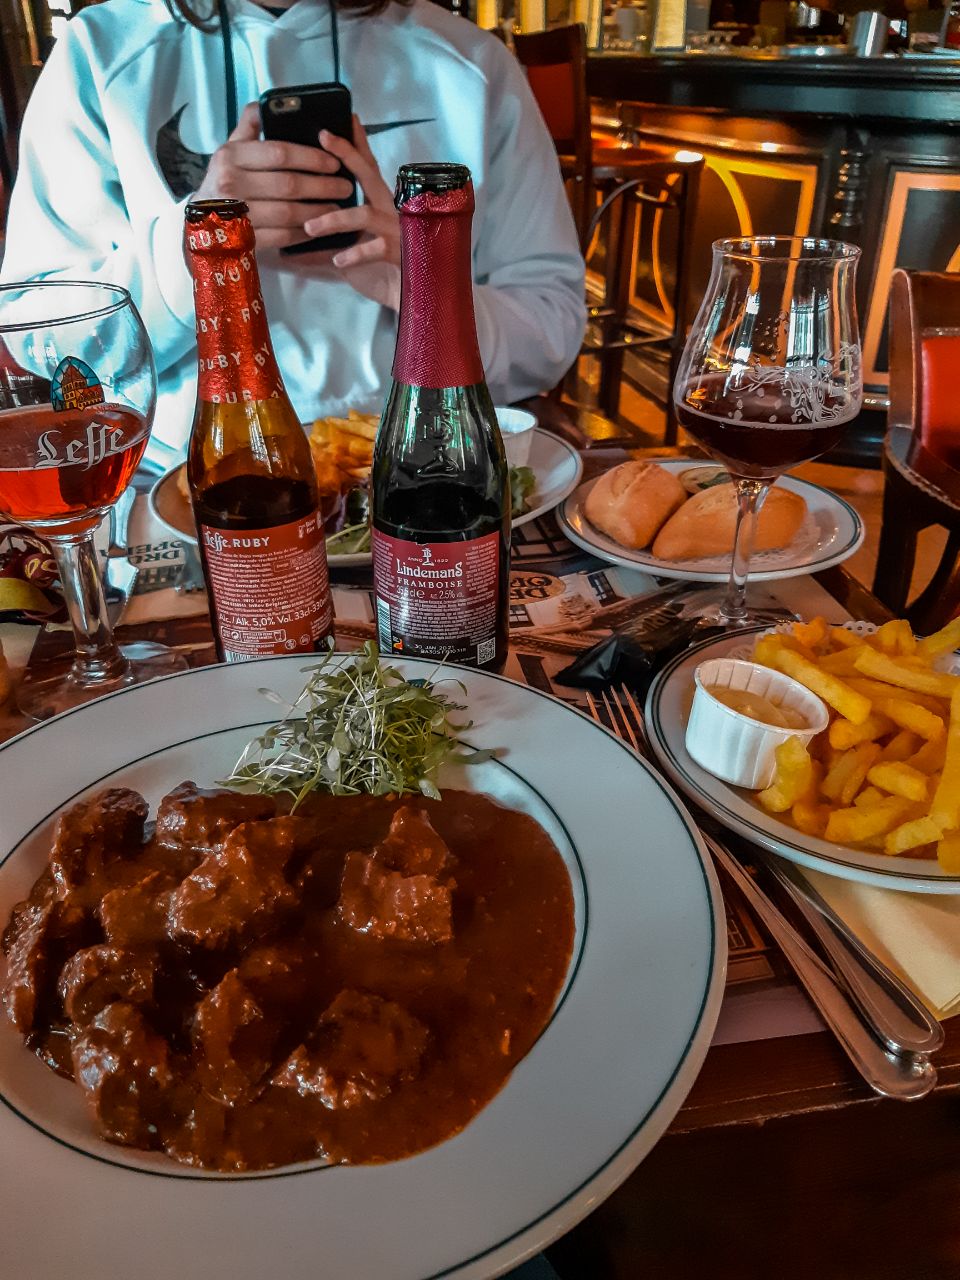 Flamish Ragout and Fries in Brussels
Drug Opera Brussels
Perfect 2 day Brussels itinerary